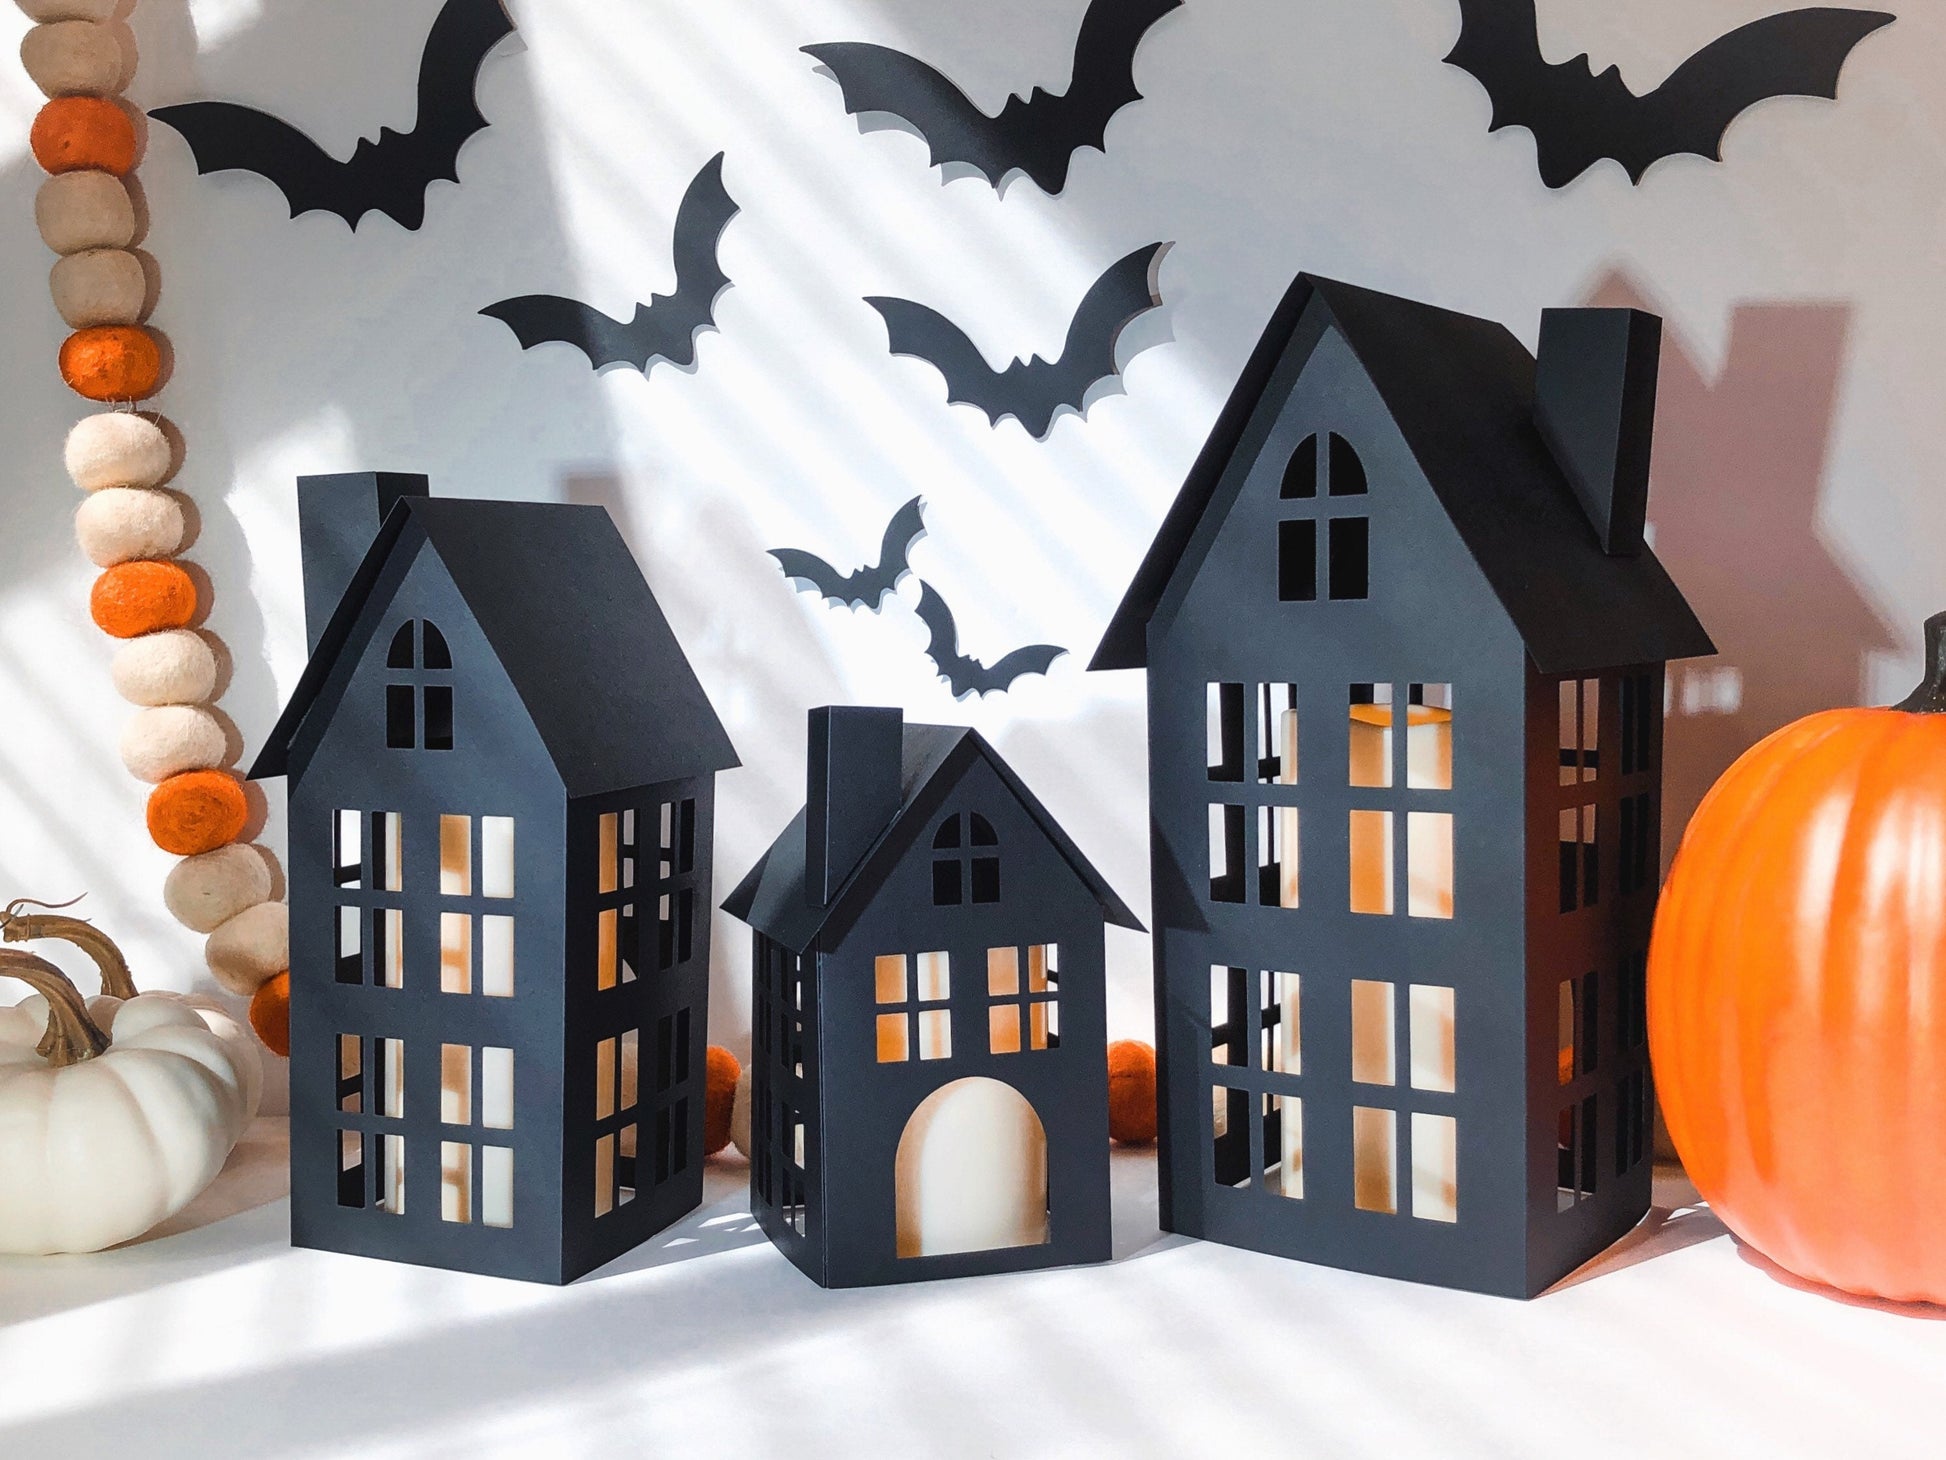 DIY Paper Halloween Village with Bats, Easy DIY kit for kids and families to add to Halloween decor